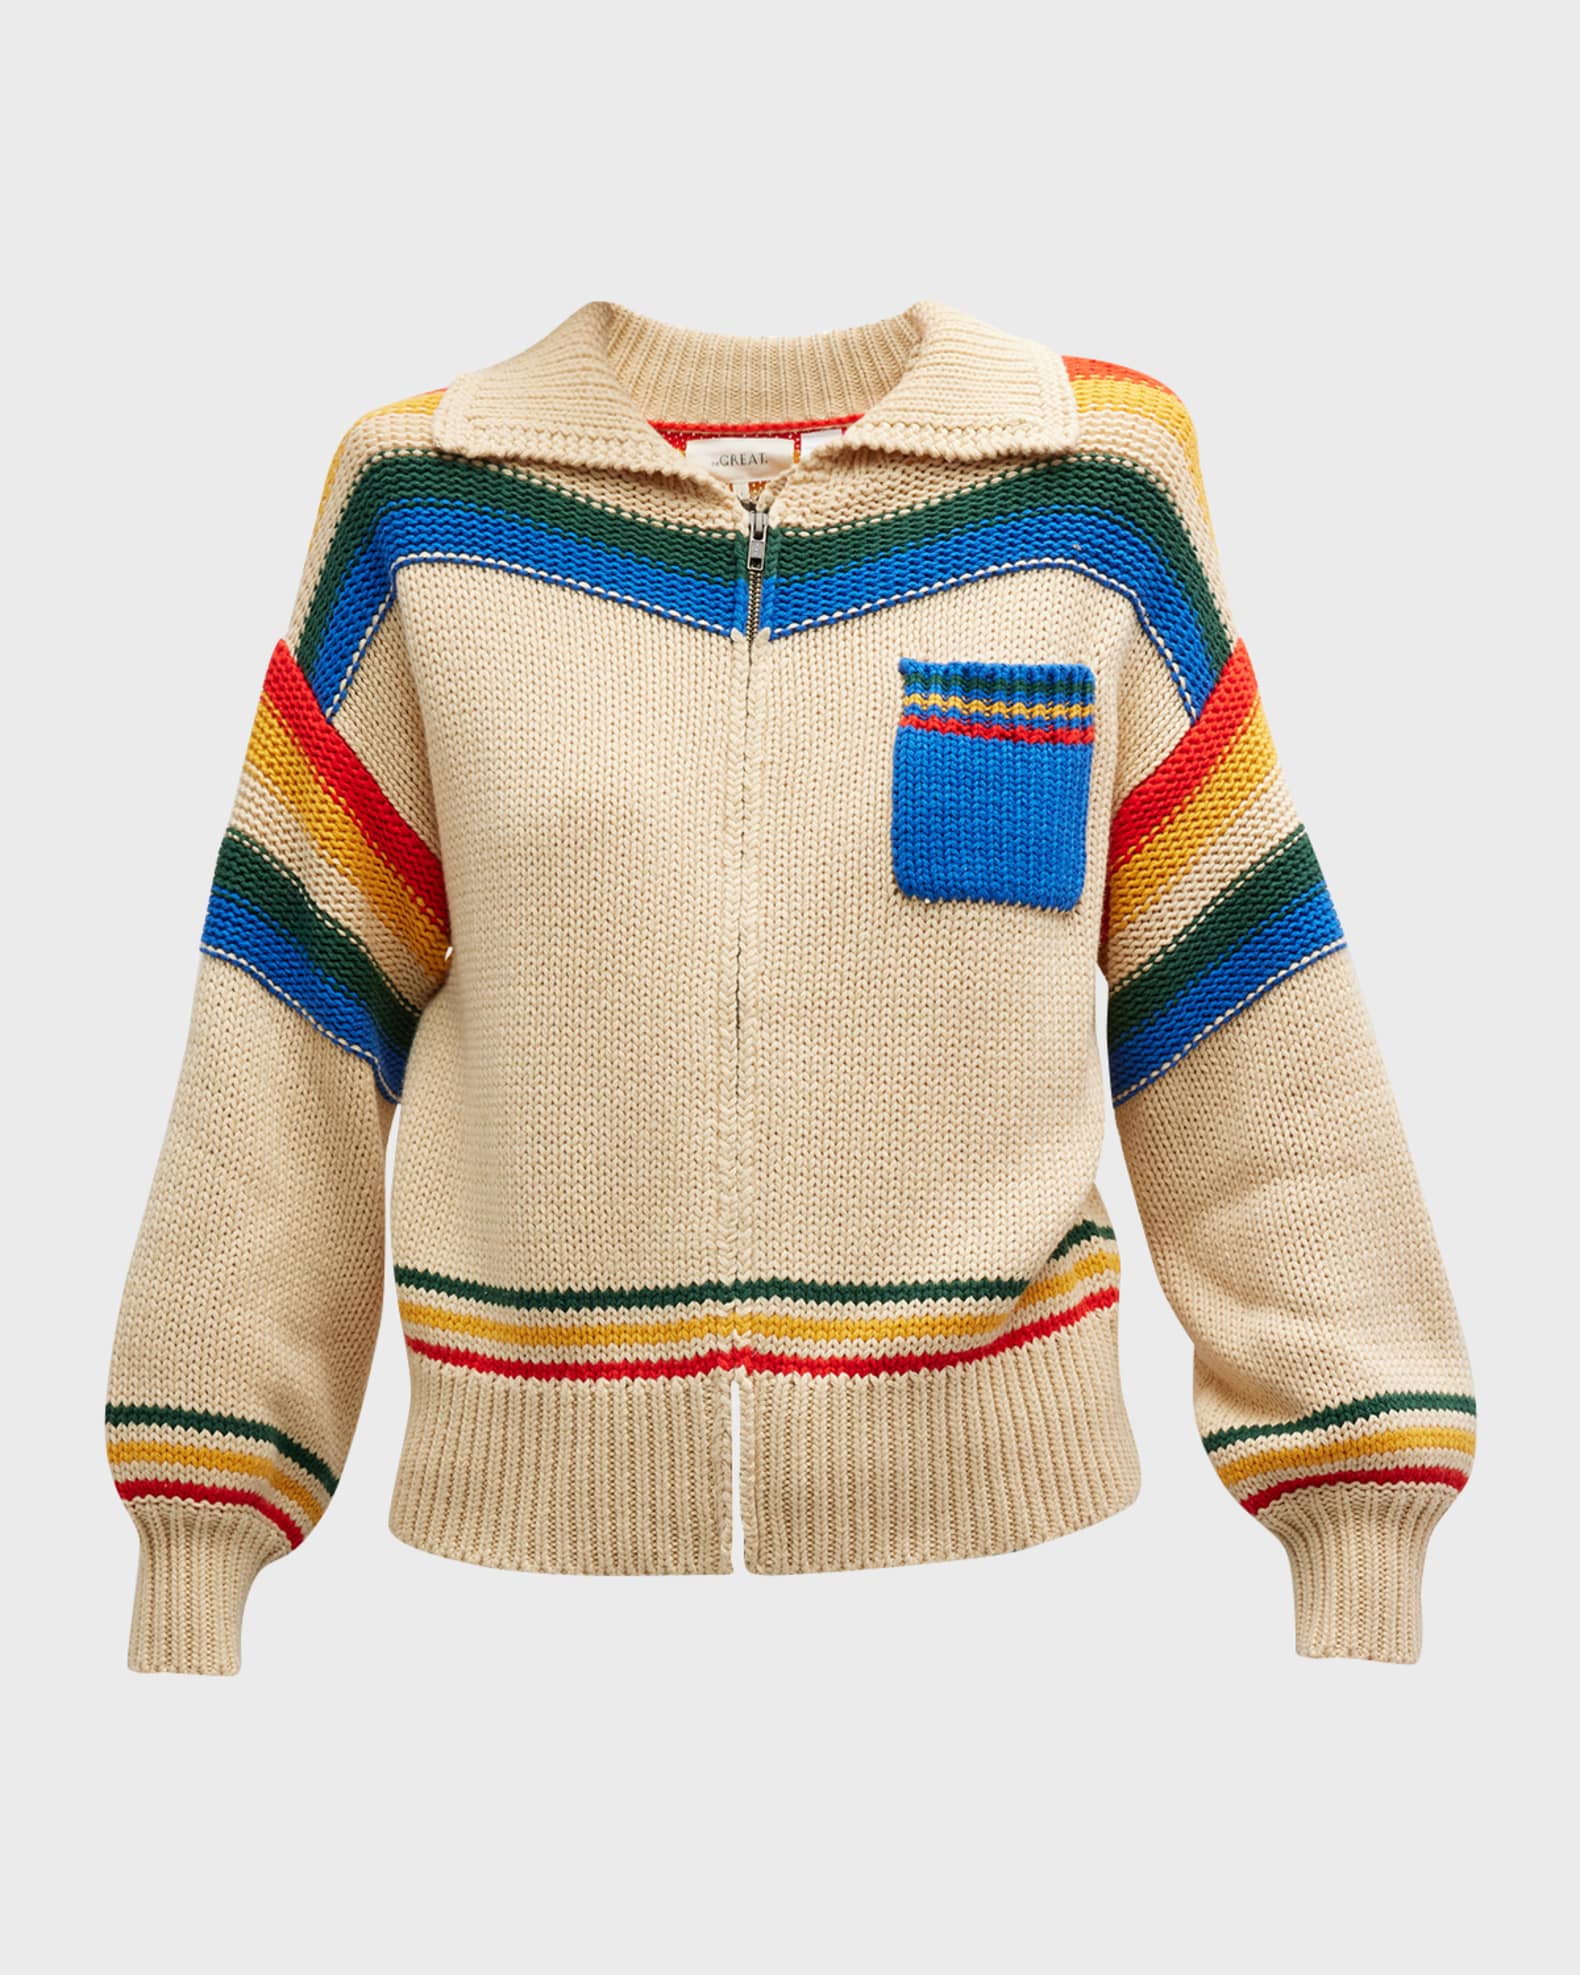 The Great The Ranch Cardigan | Neiman Marcus